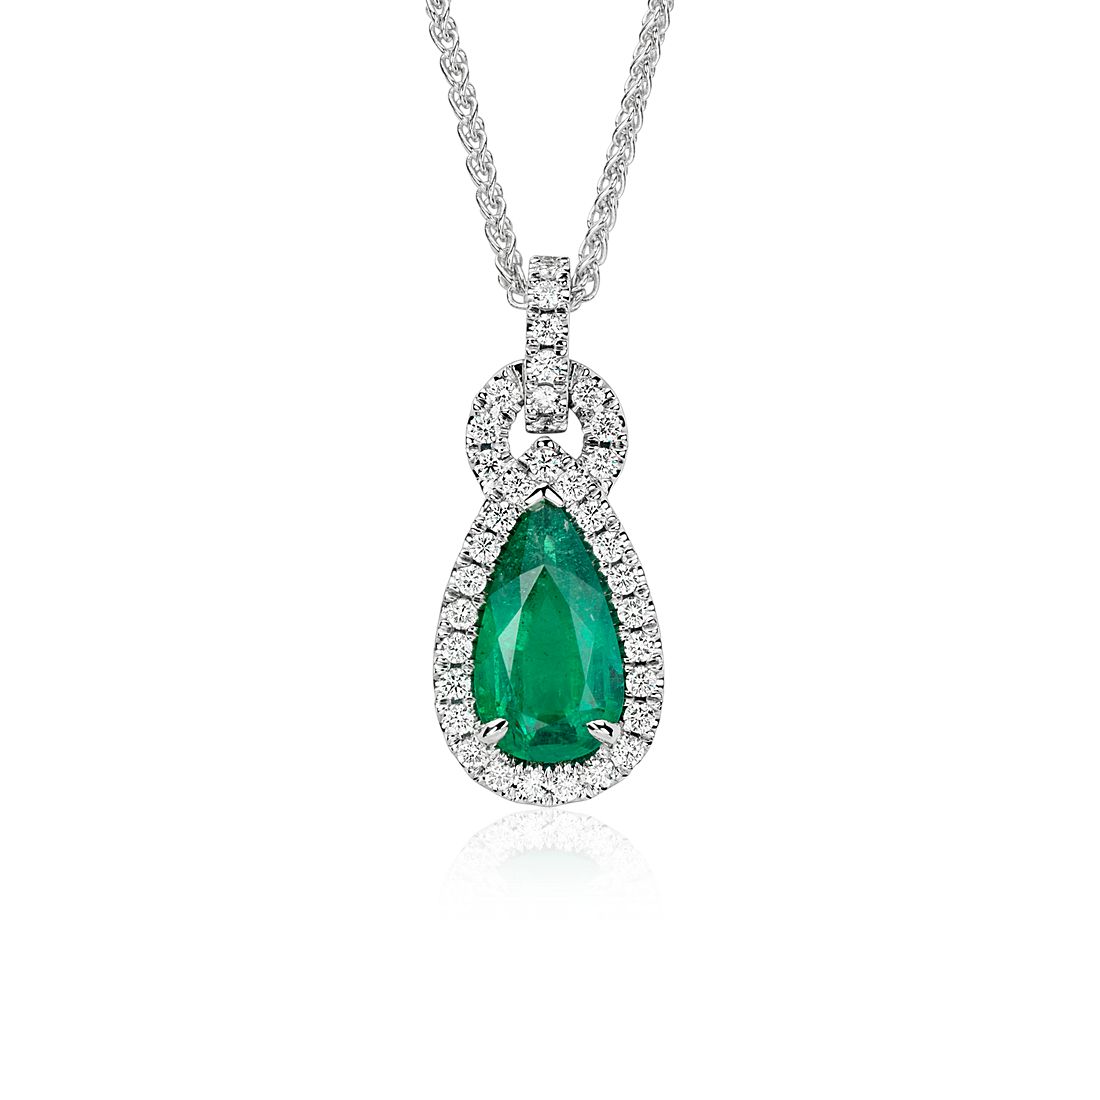 Pear-Shaped Emerald and Pavé Halo Loop Diamond Pendant in 18k White Gold  (2.19 ct. center)